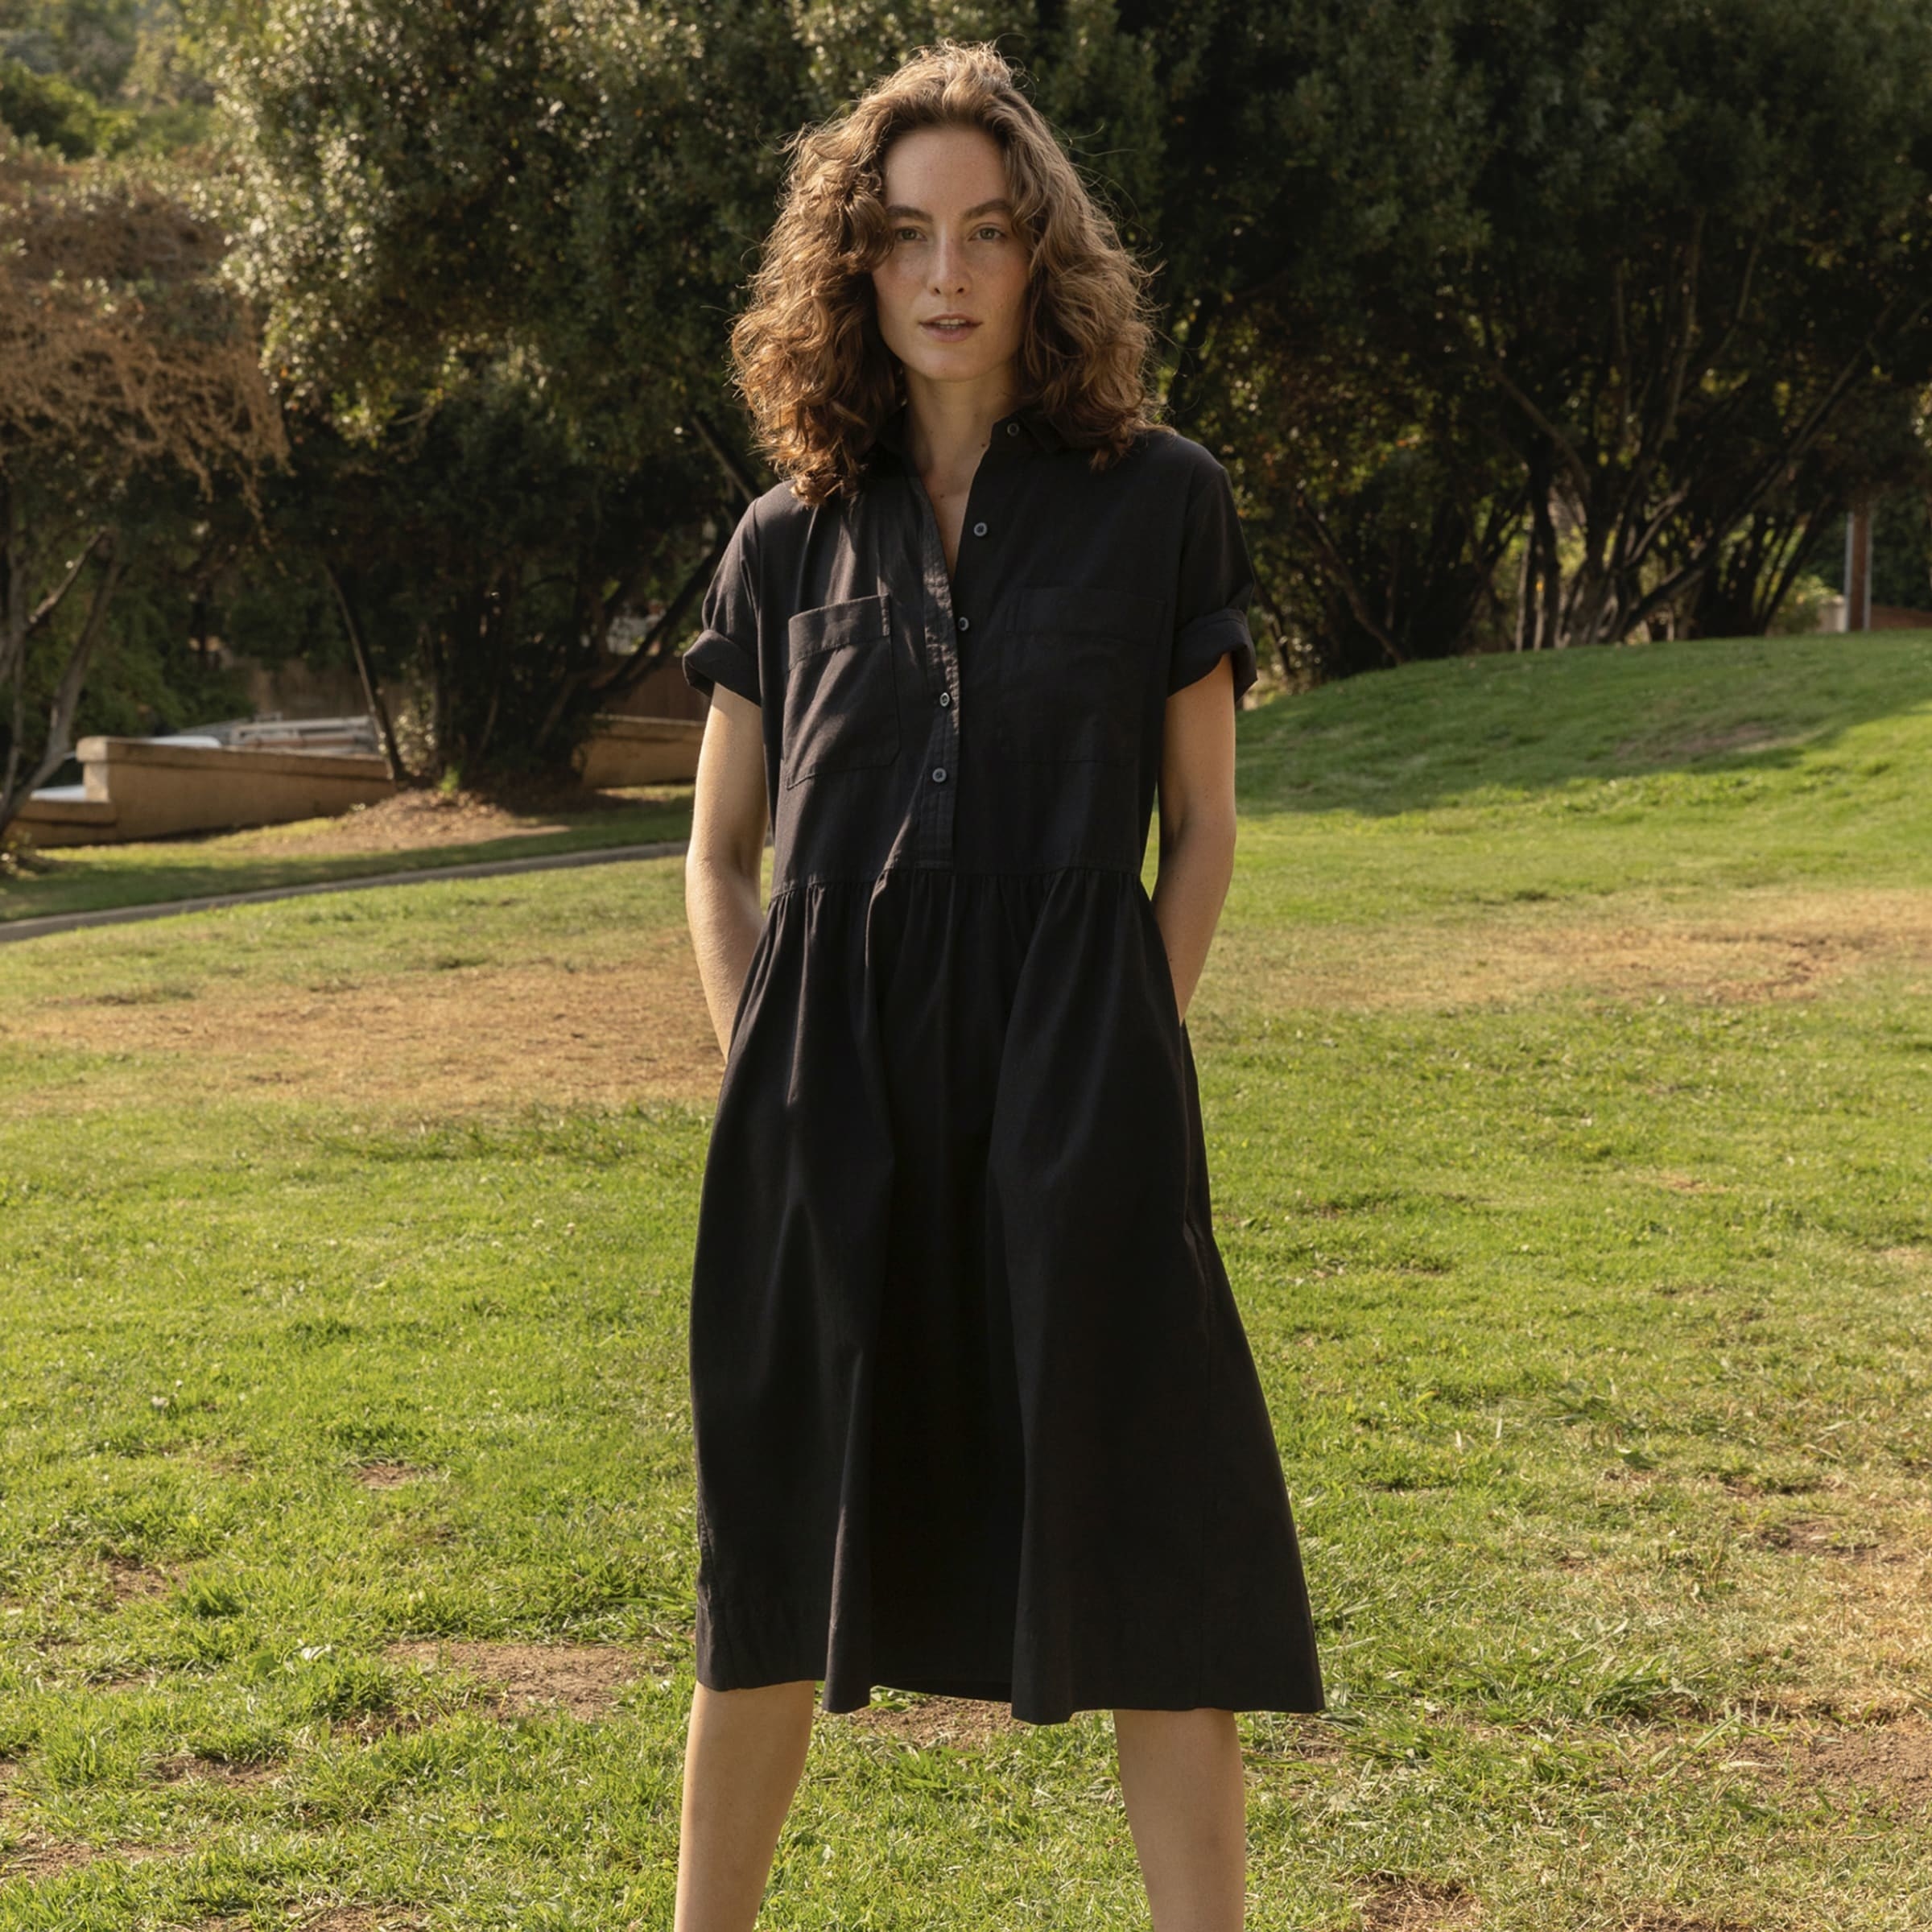 model wearing the black shirtdress while putting hands in pockets